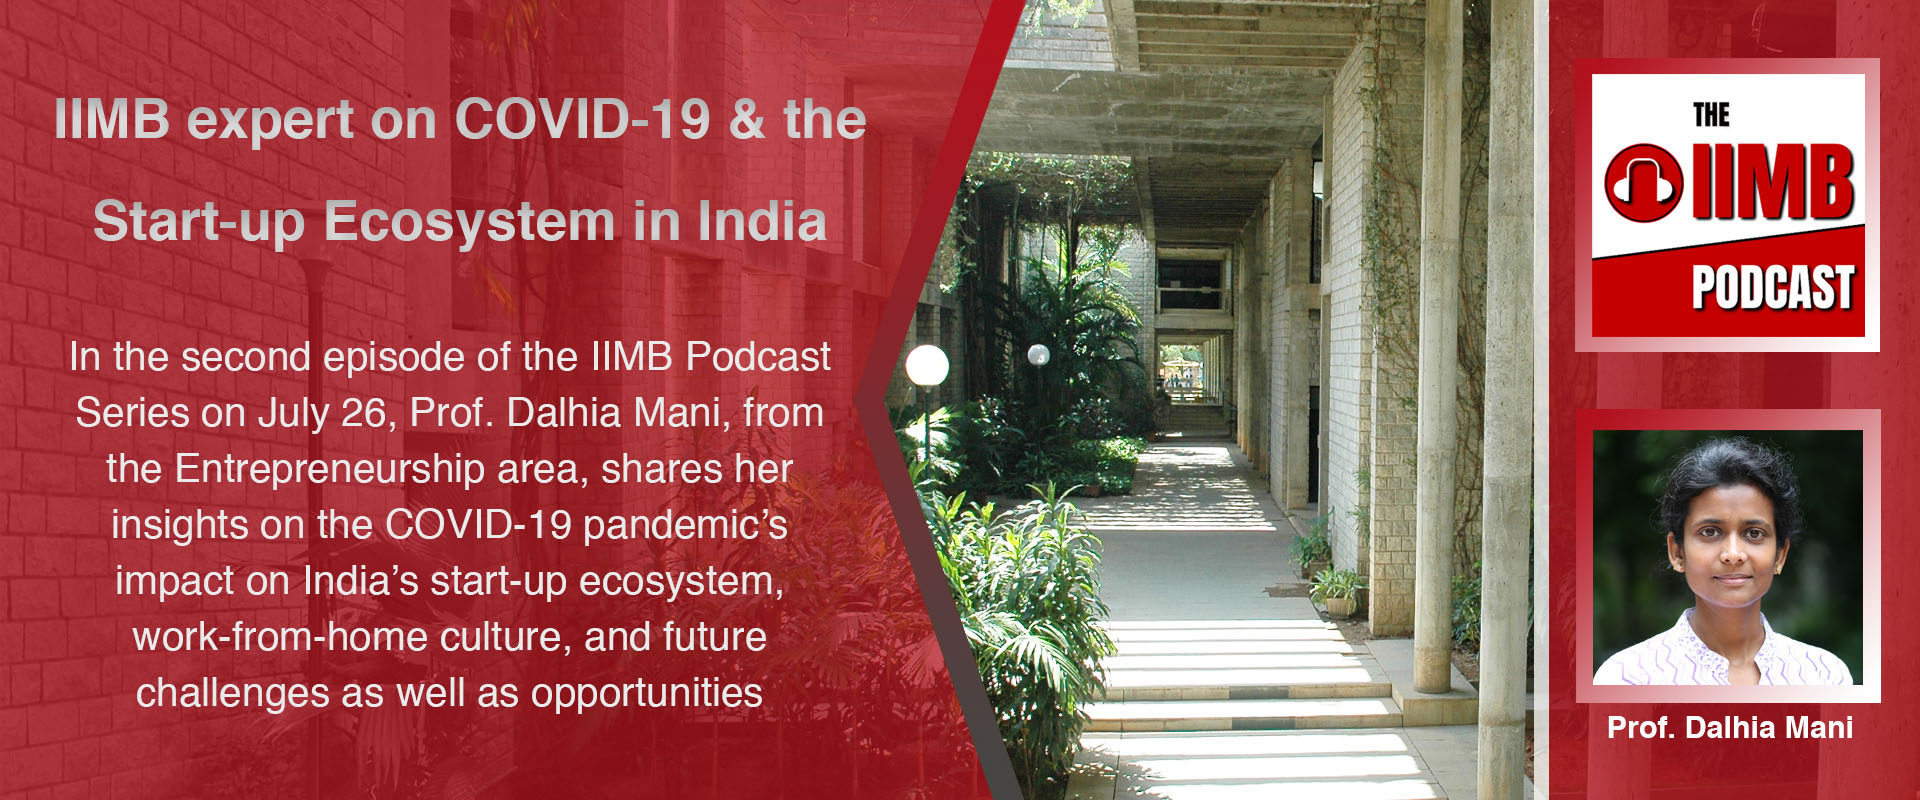 IIMB expert on COVID-19 & the Start-up Ecosystem in India